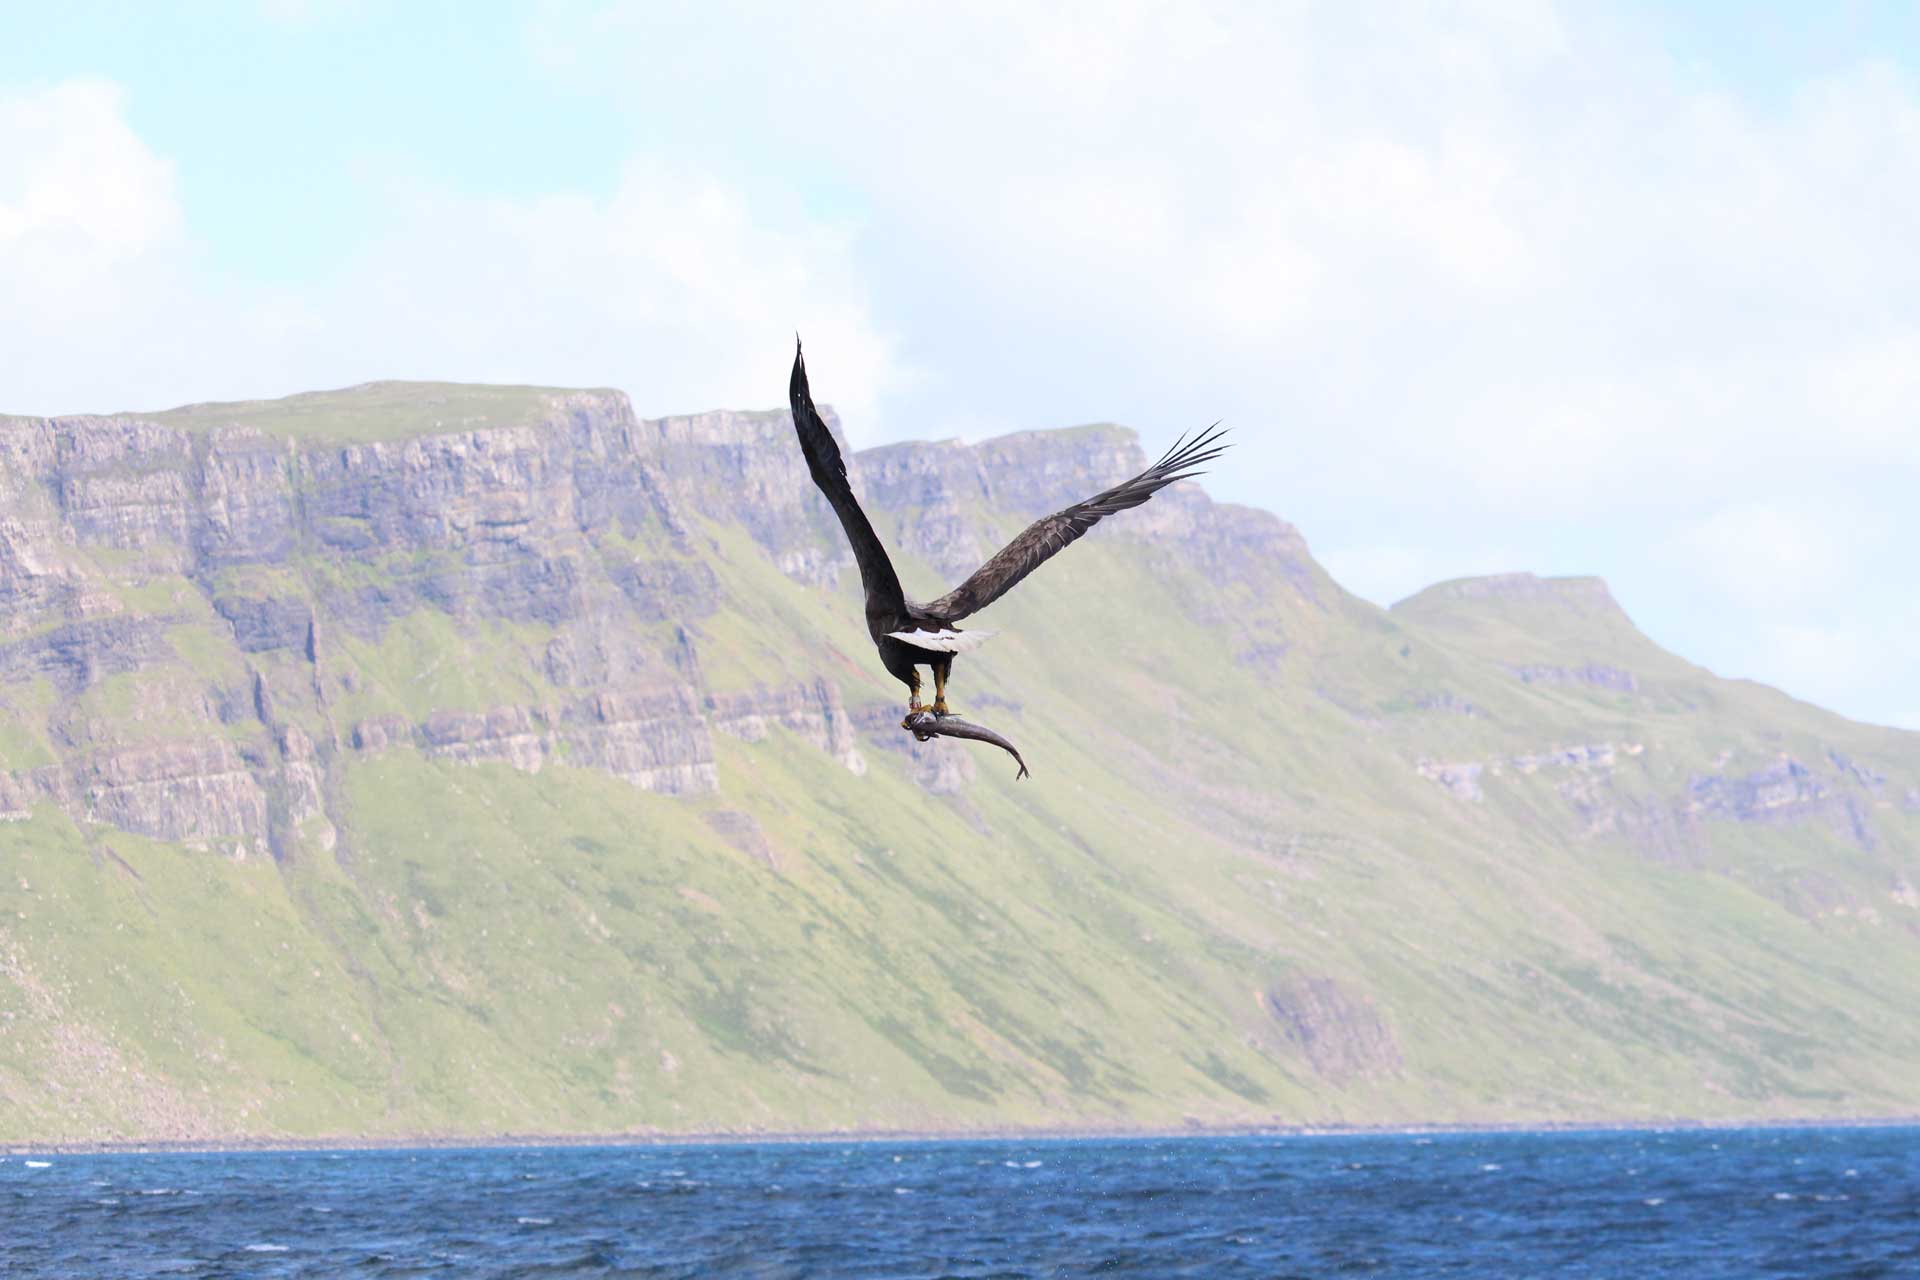 Discover wildlife on your adventures like this sea eagle off the southern coast of Skye